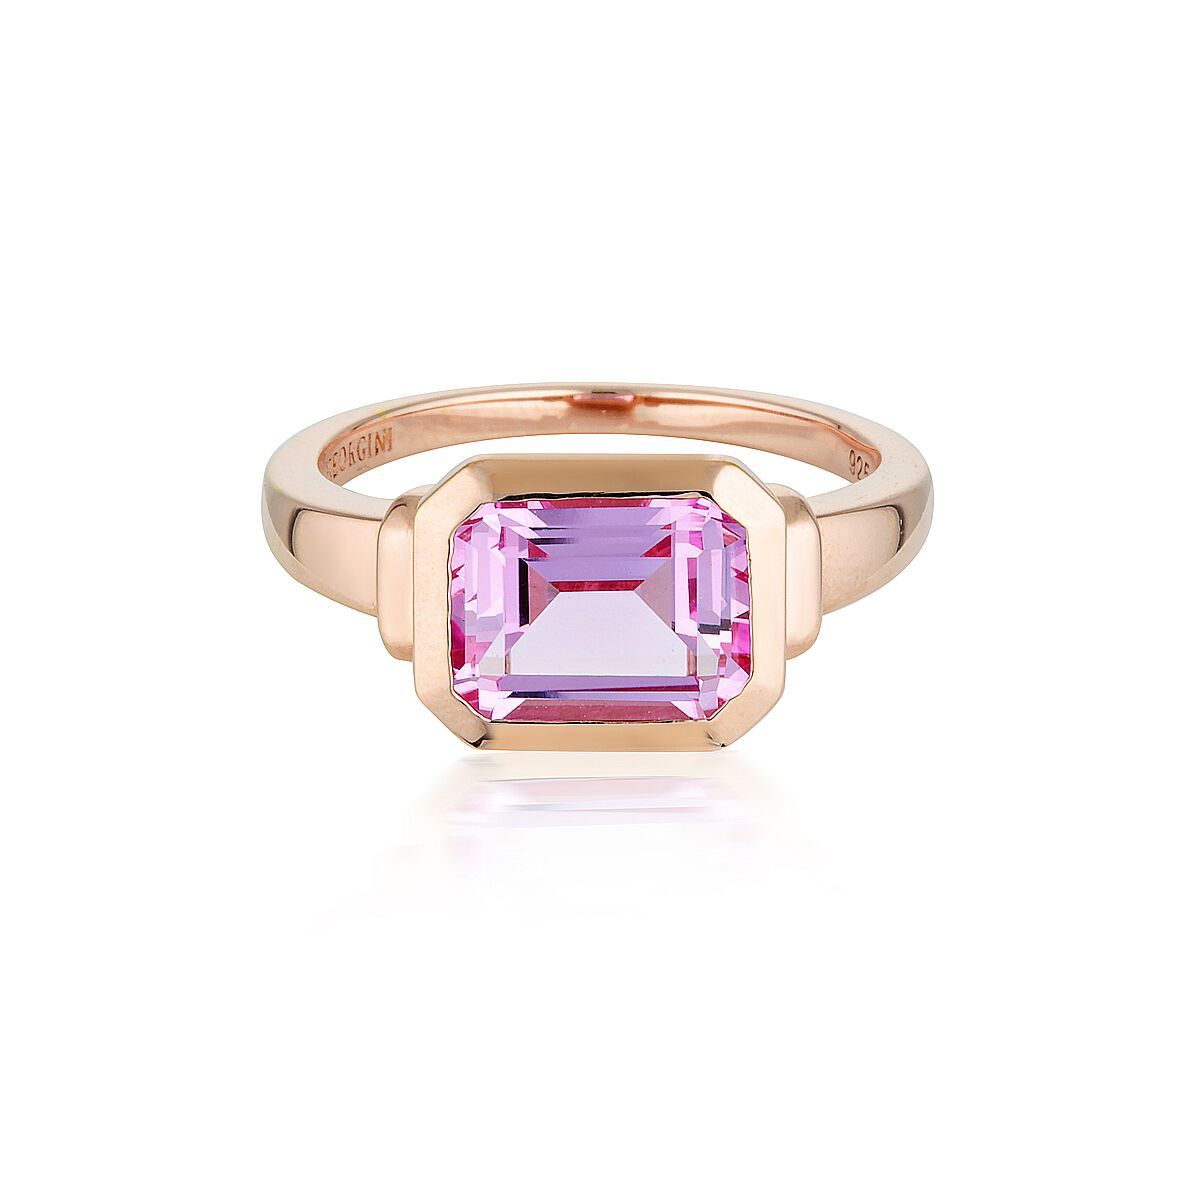 EMILIO PINK SAPPHIRE ROSE GOLD ZION RING Bevilles Jewellers 